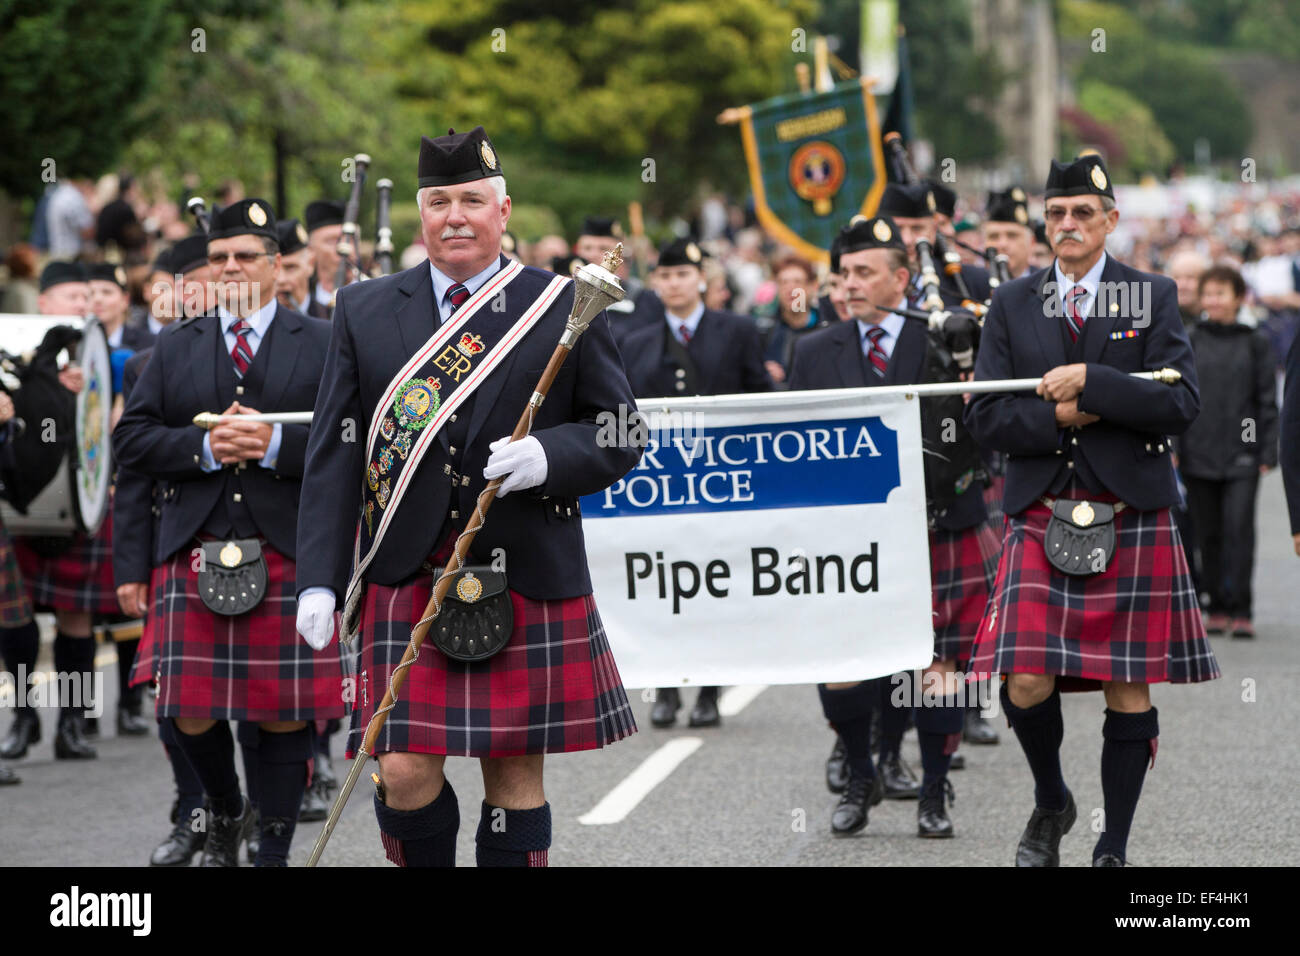 Greater Victoria Police pipe band from Victoria, British Columbia, Canada,  taking part in Pipefest in Stirling, Scotland. Stock Photo